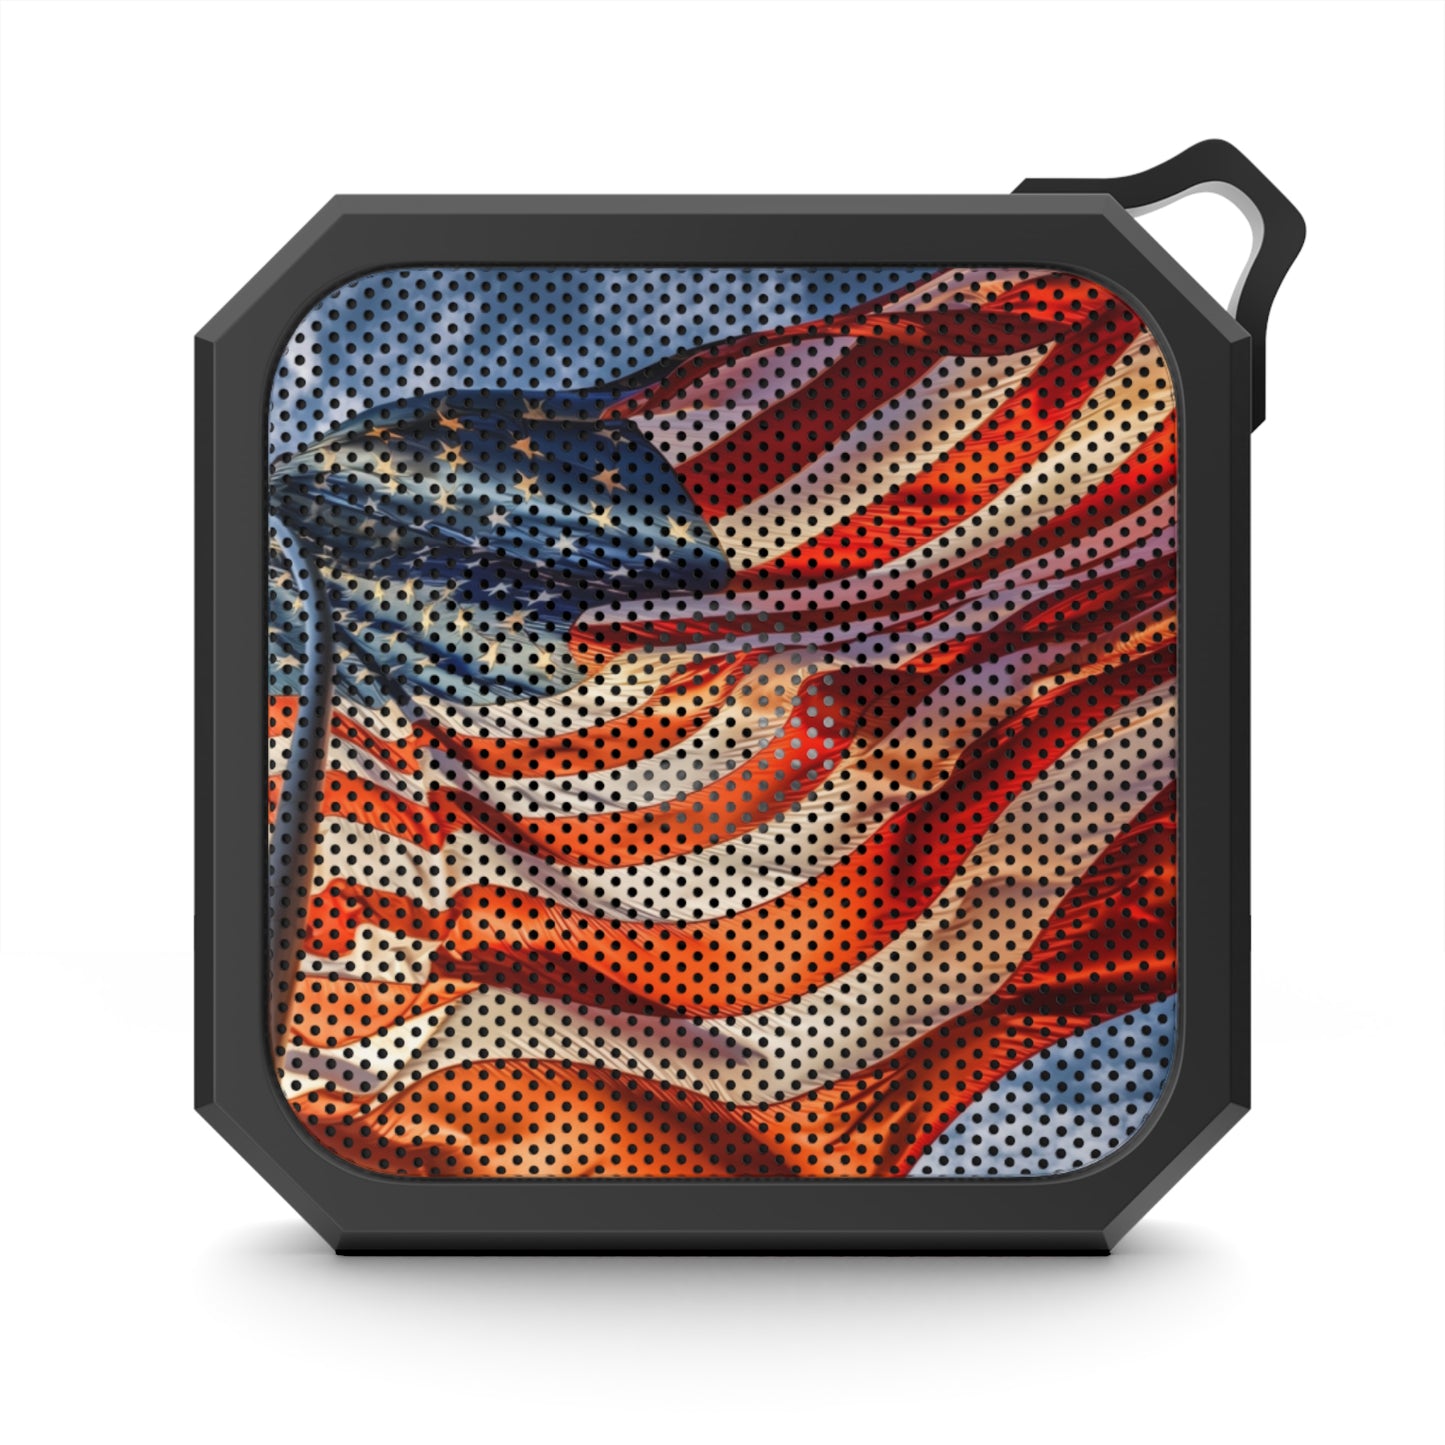 Old Glory Blackwater Bluetooth 5.0 Speaker, Up to 12 Hours of Playtime, Portable Wireless Speaker with Dual Equalizer, Built-in Microphone, AUX Input, for Home, Outdoor, Party (Black)